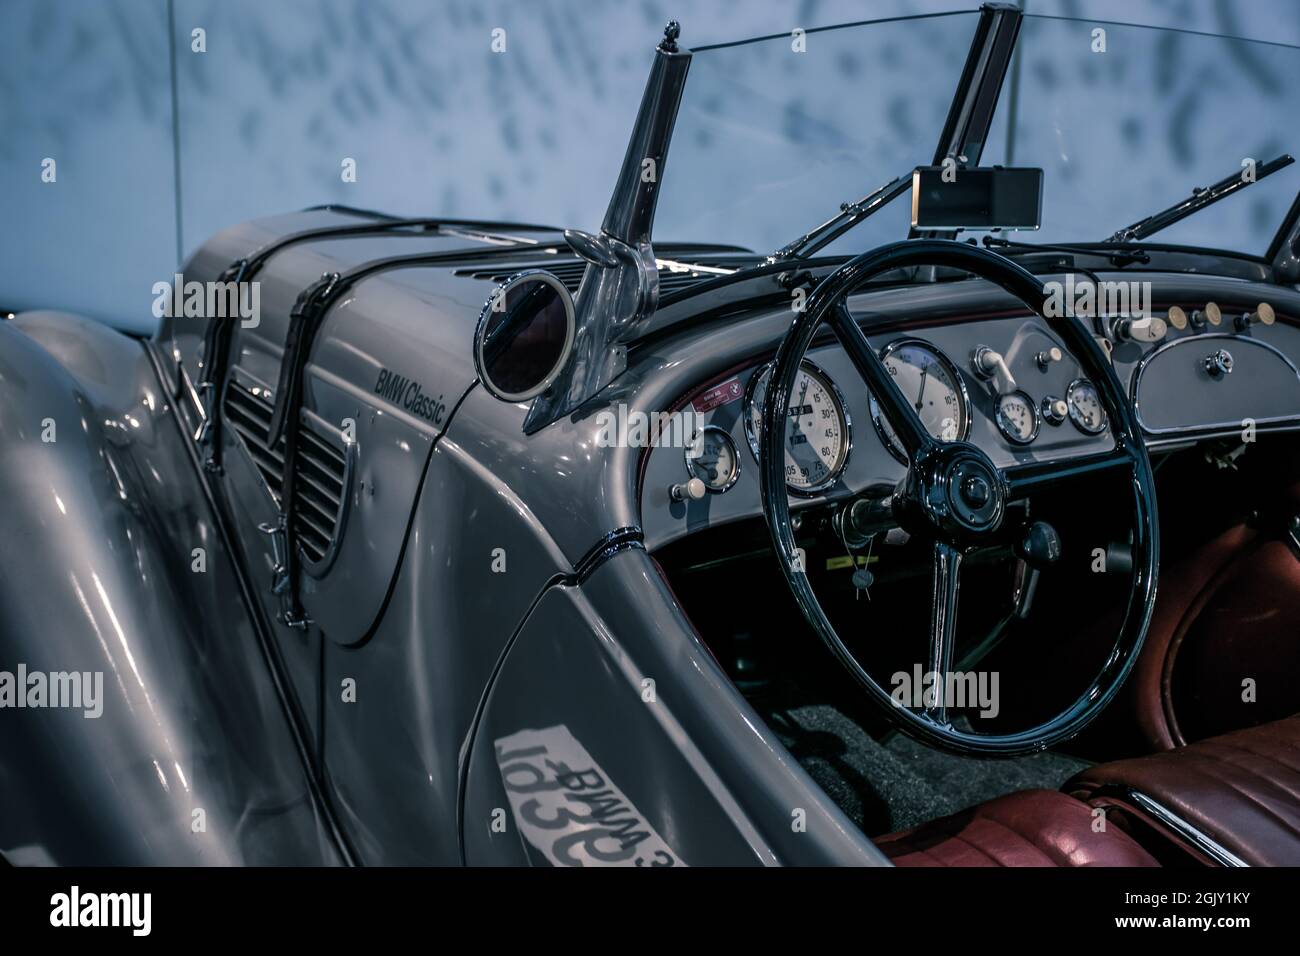 Munich/ Germany - May, 24 2019: BMW 328 classic German 1930s sport roadster  in BMW Museum/ BMW Welt Stock Photo